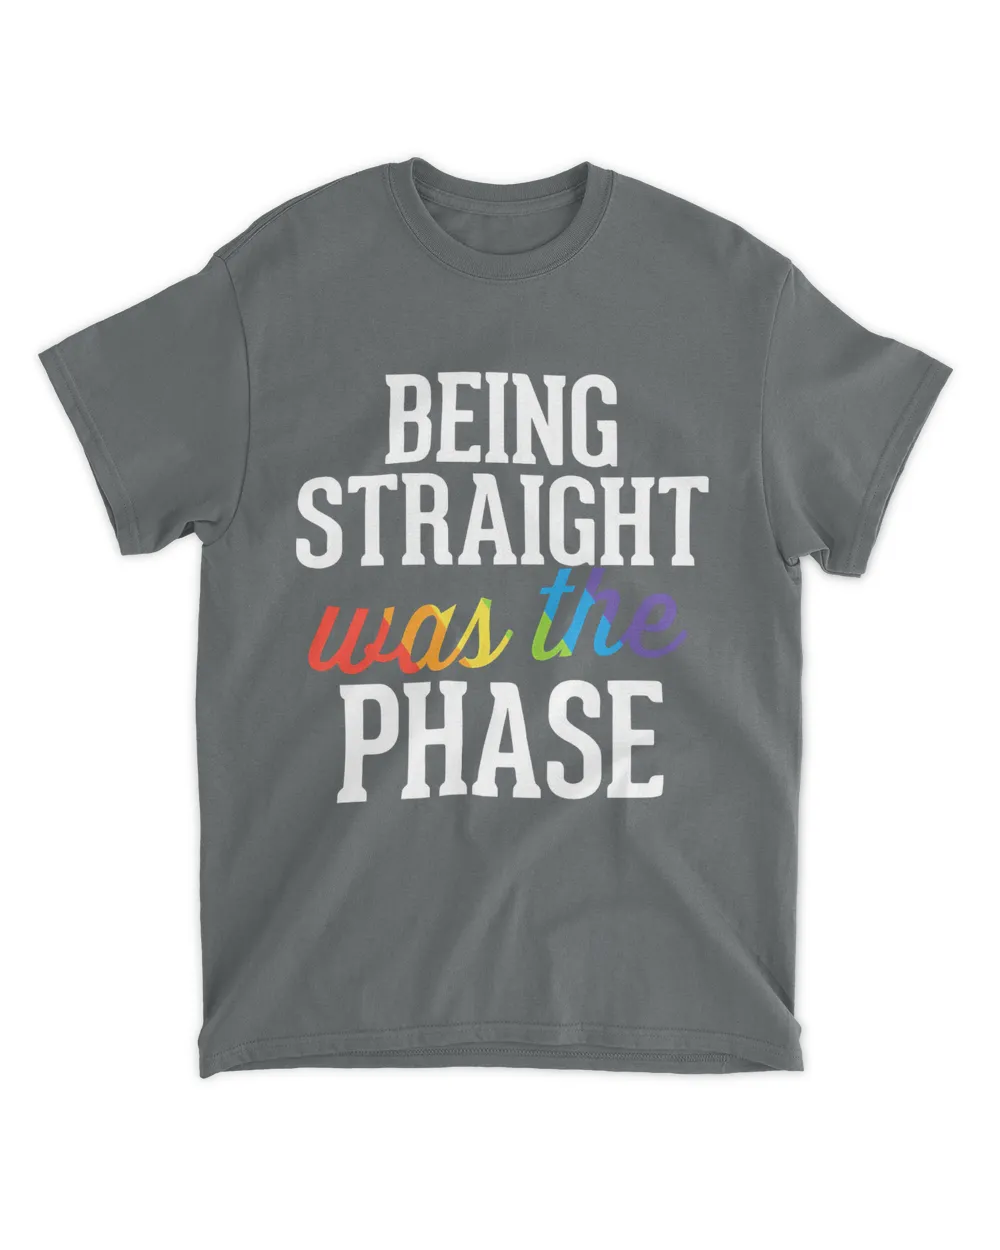 Being Straight Was The Phase Shirt